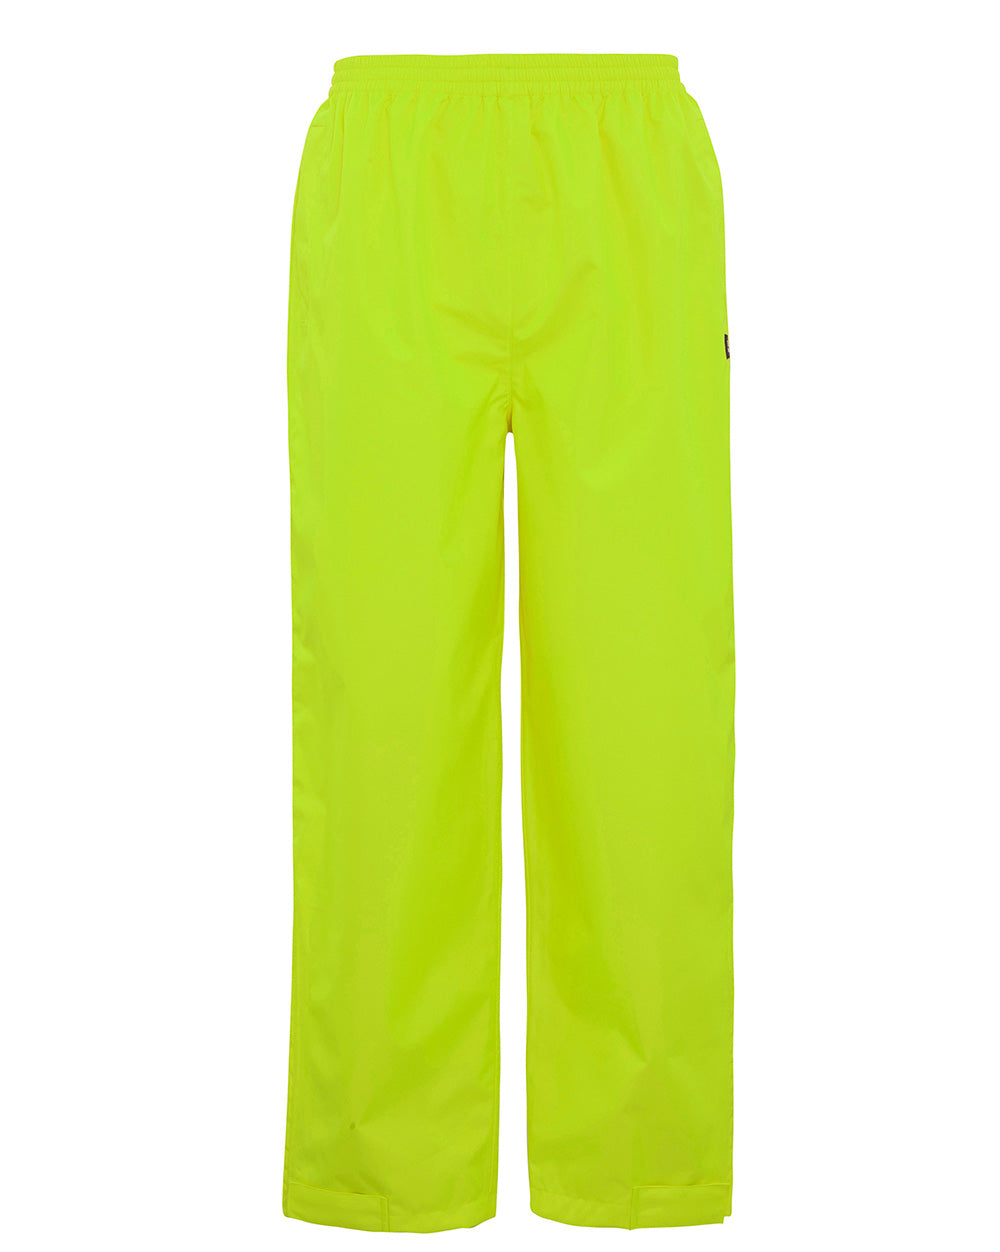 Ultimate Overpant in Fluoro Yellow